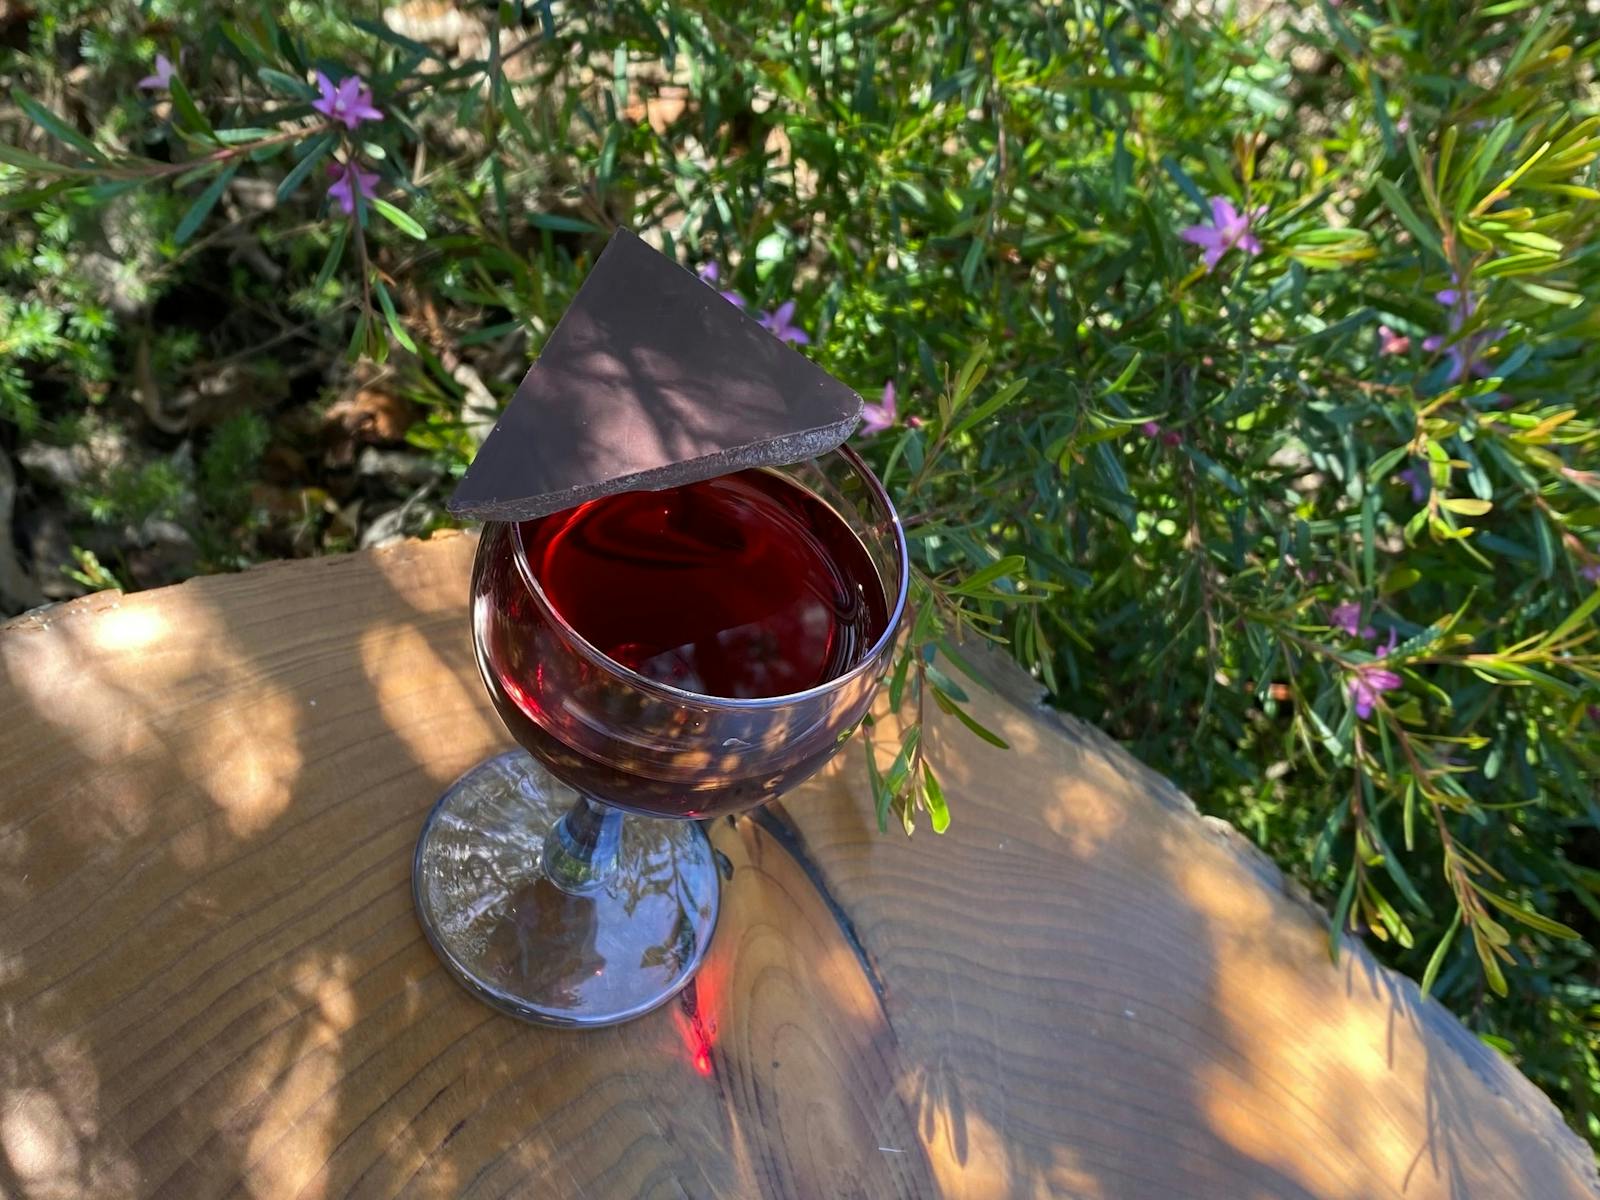 A glass of wine with dark chocolate balanced over half of the glass atop a wooden table in a garden